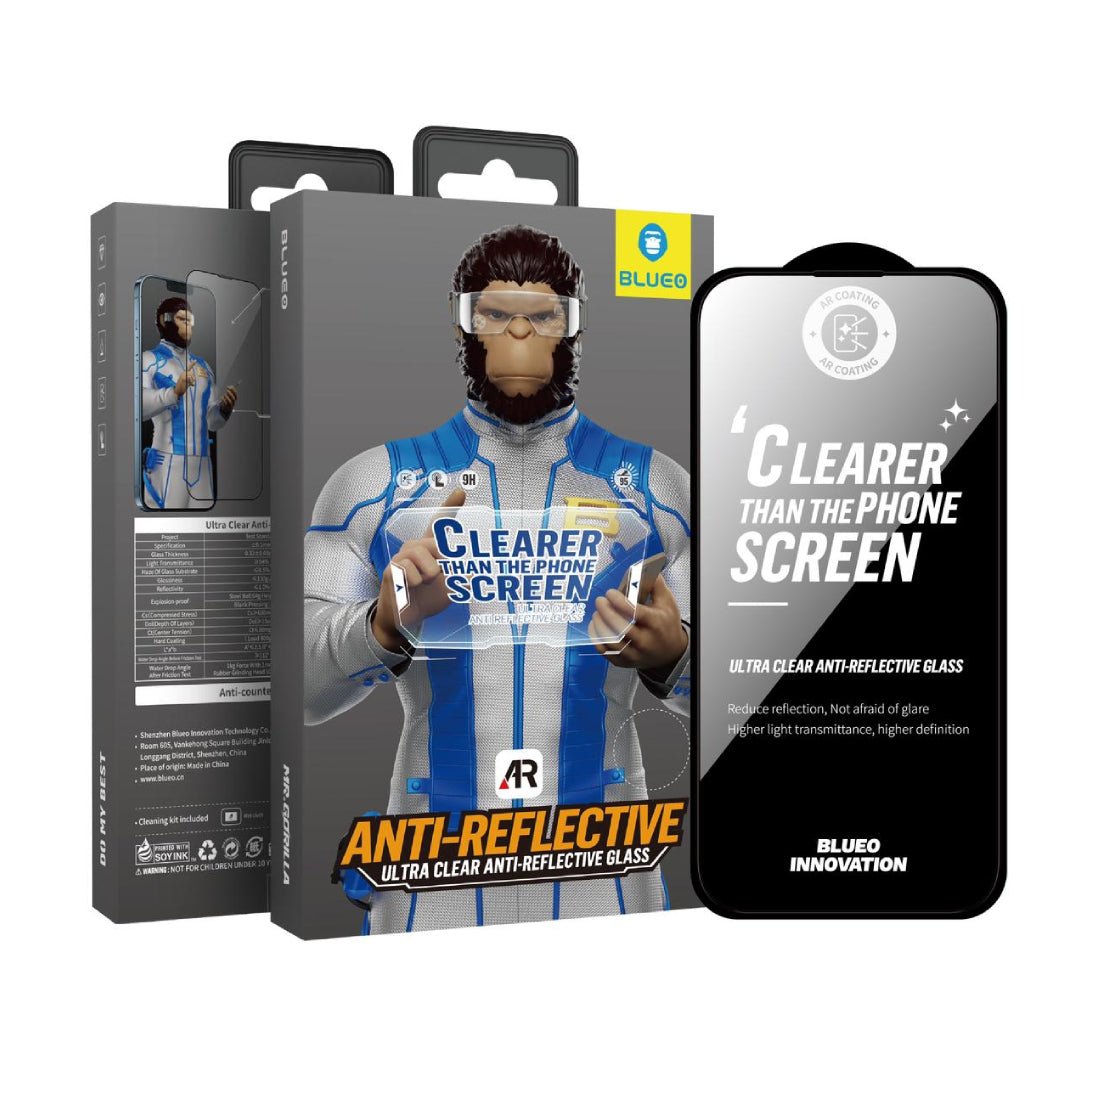 Blueo Ultra Clear AR Anti-Reflective HD Glass with applicator - iPhone15 6.1 & iPhone14 Pro 6.1 - أكسسوار - Store 974 | ستور ٩٧٤